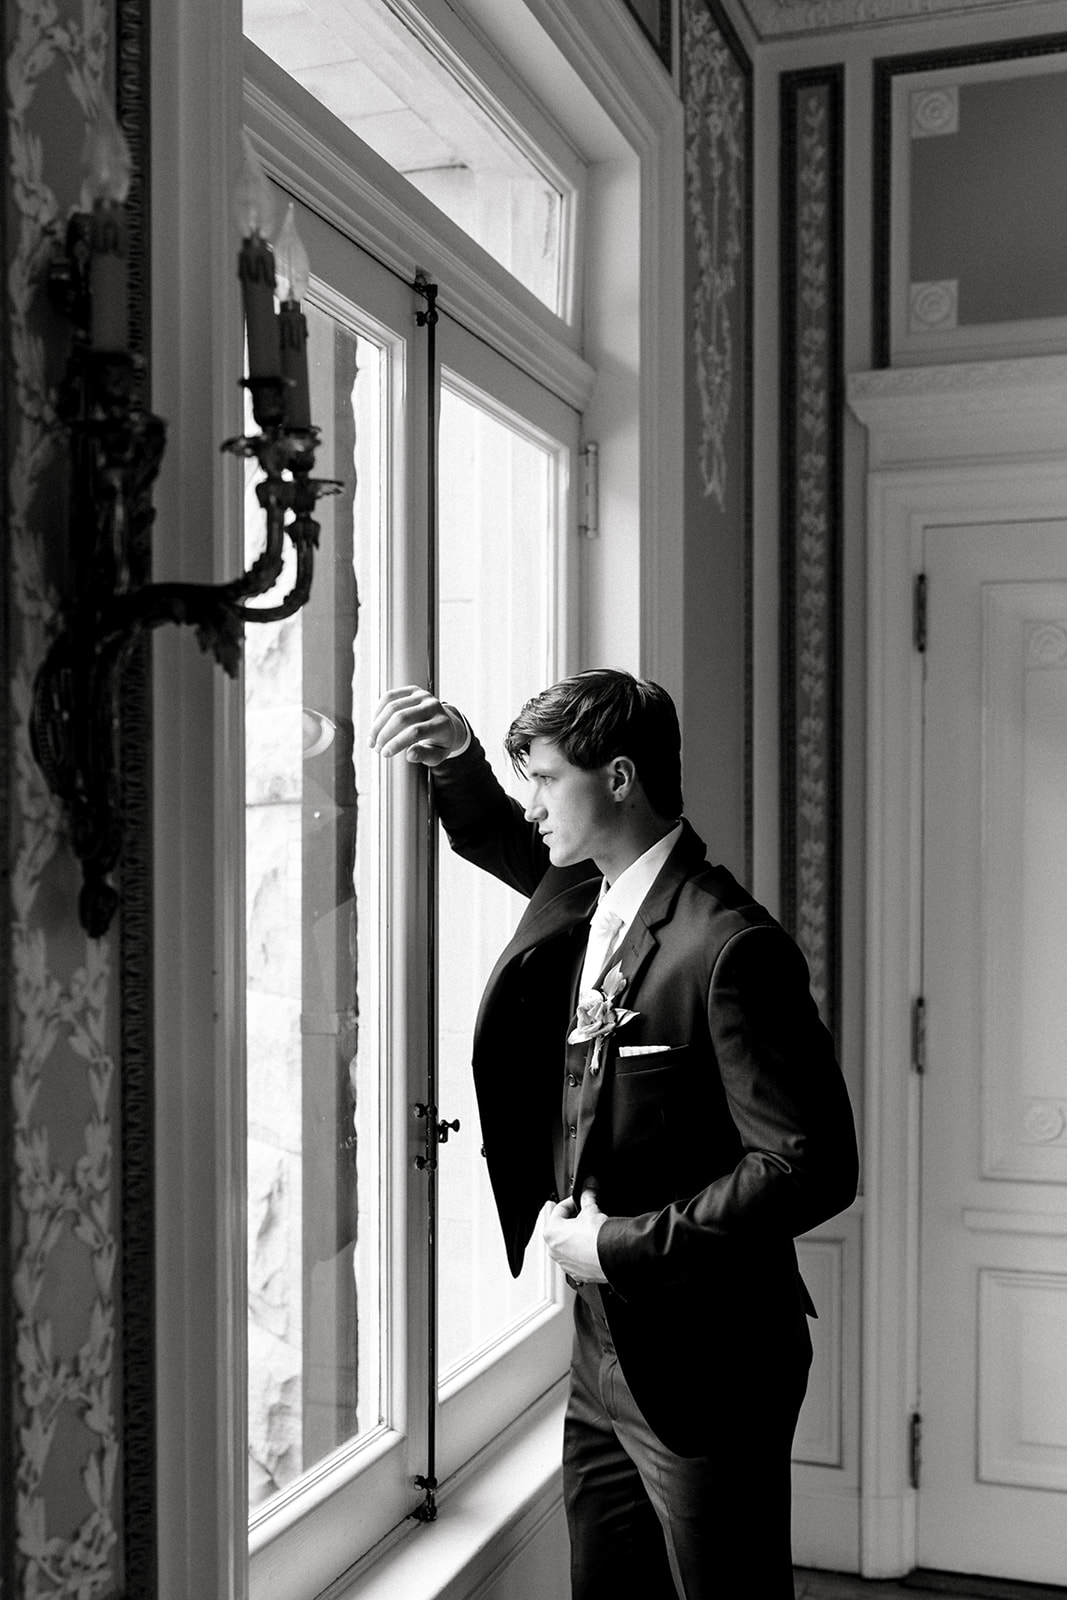 Groom in classic black tuxedo looking out the window, reflecting the luxury wedding attire from The Modern Groom.